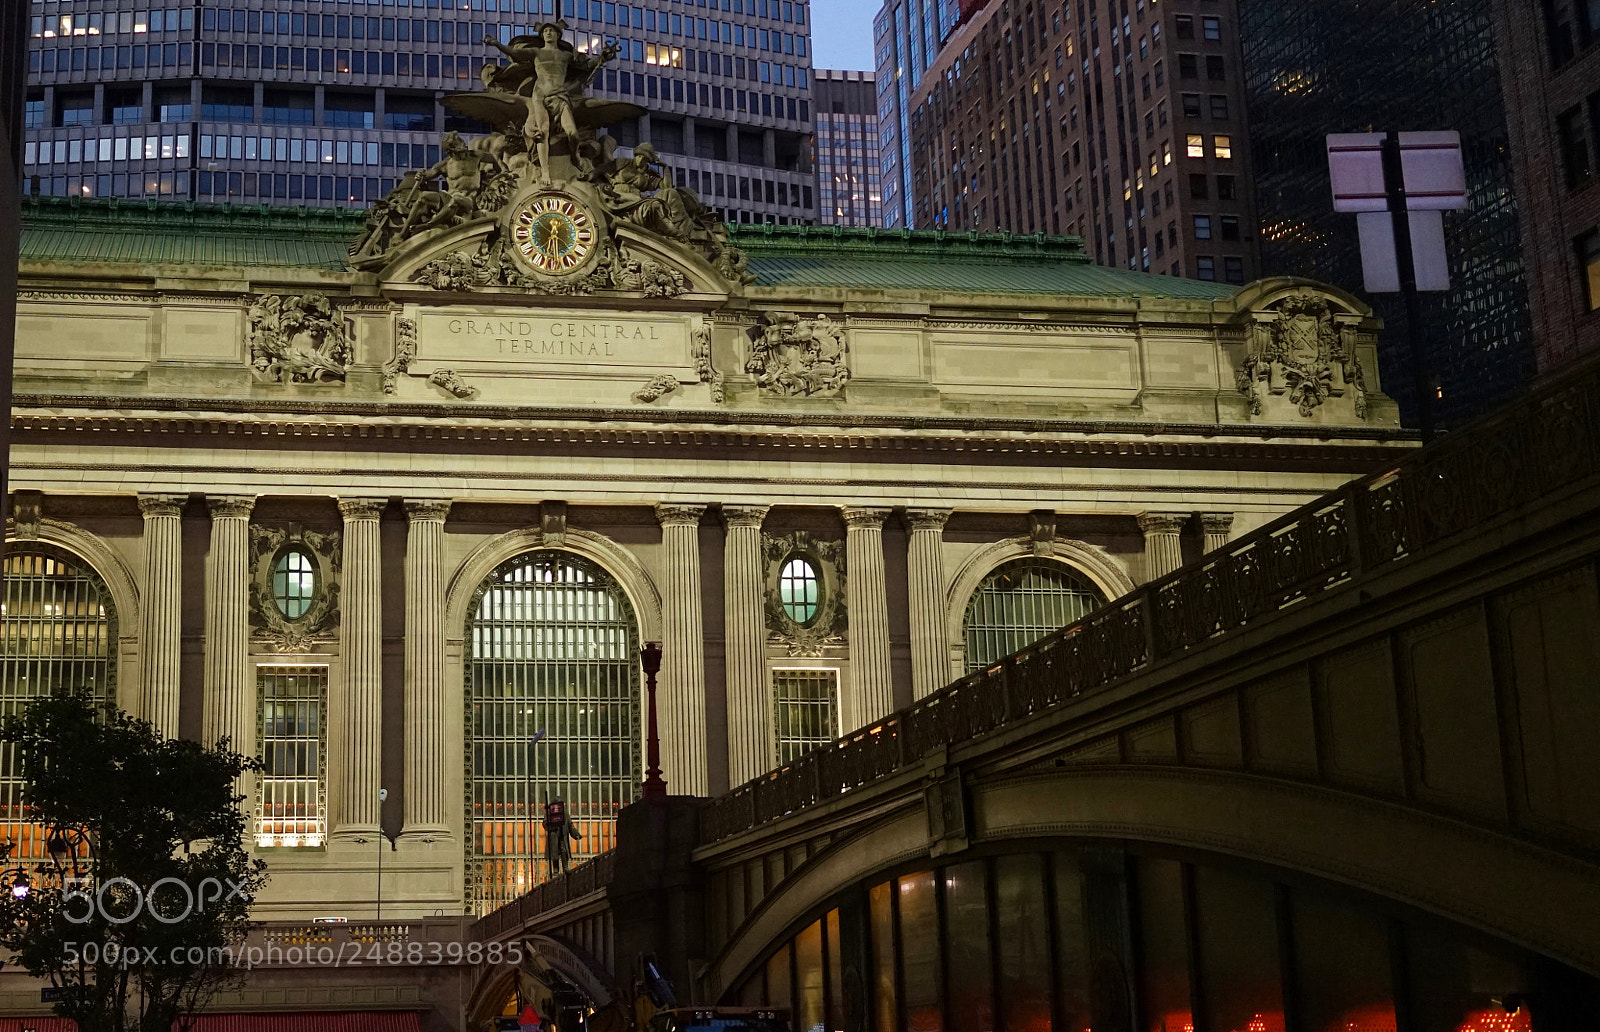 Sony a7 II sample photo. Grand central station photography